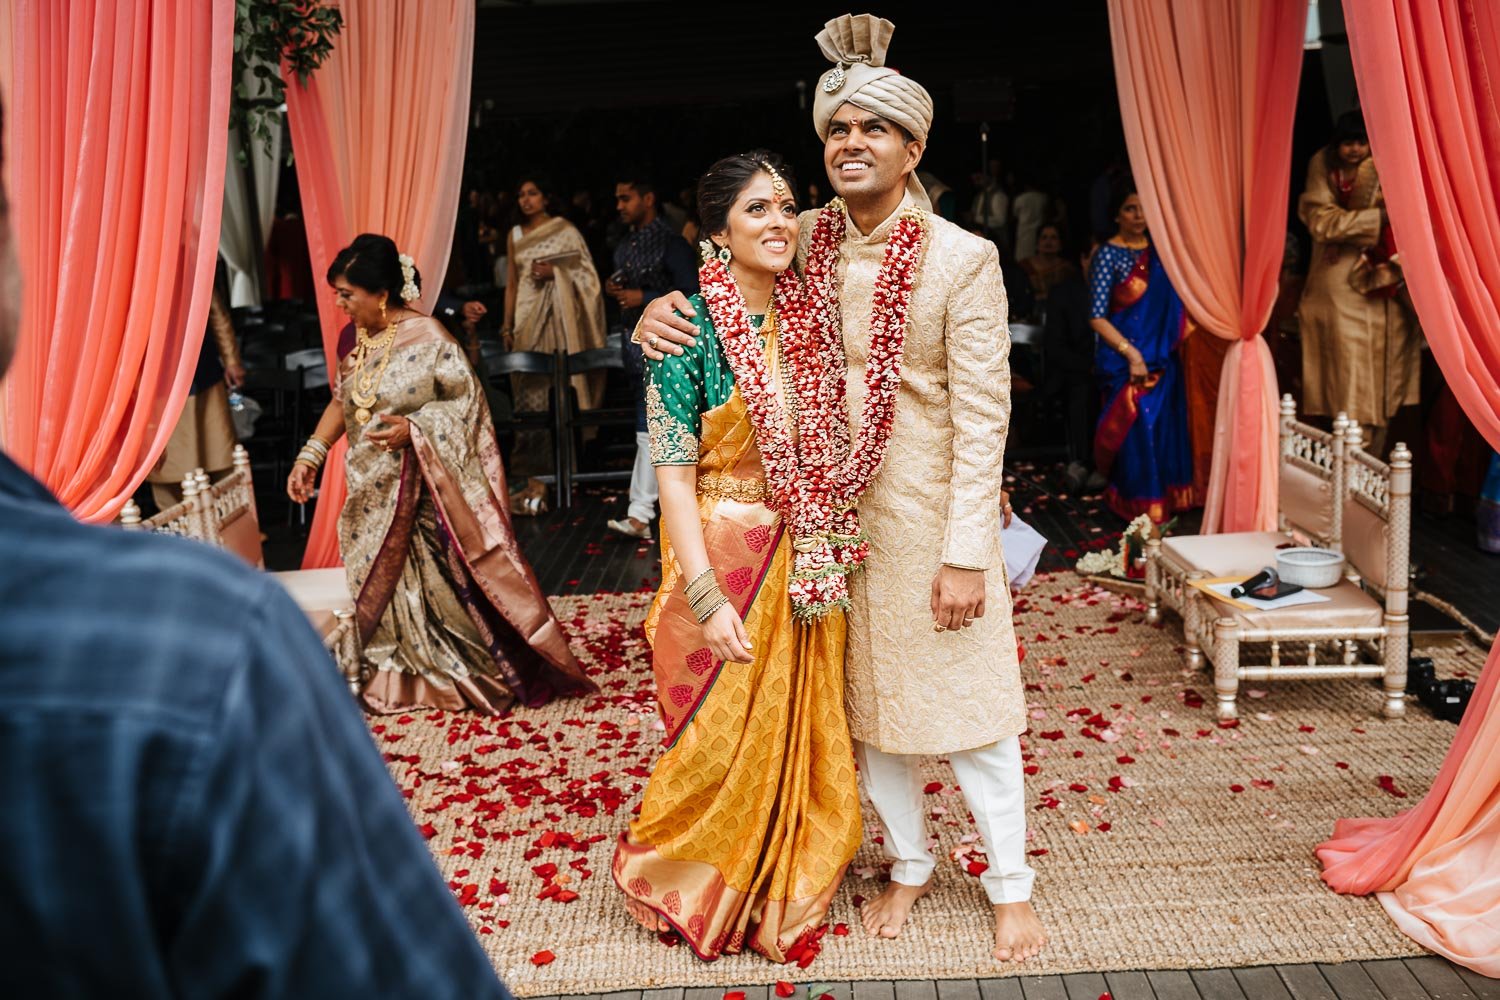 In an unposed moment, the couple take it all in at Brazos Hall Texas during their south asian Hindu ceremony